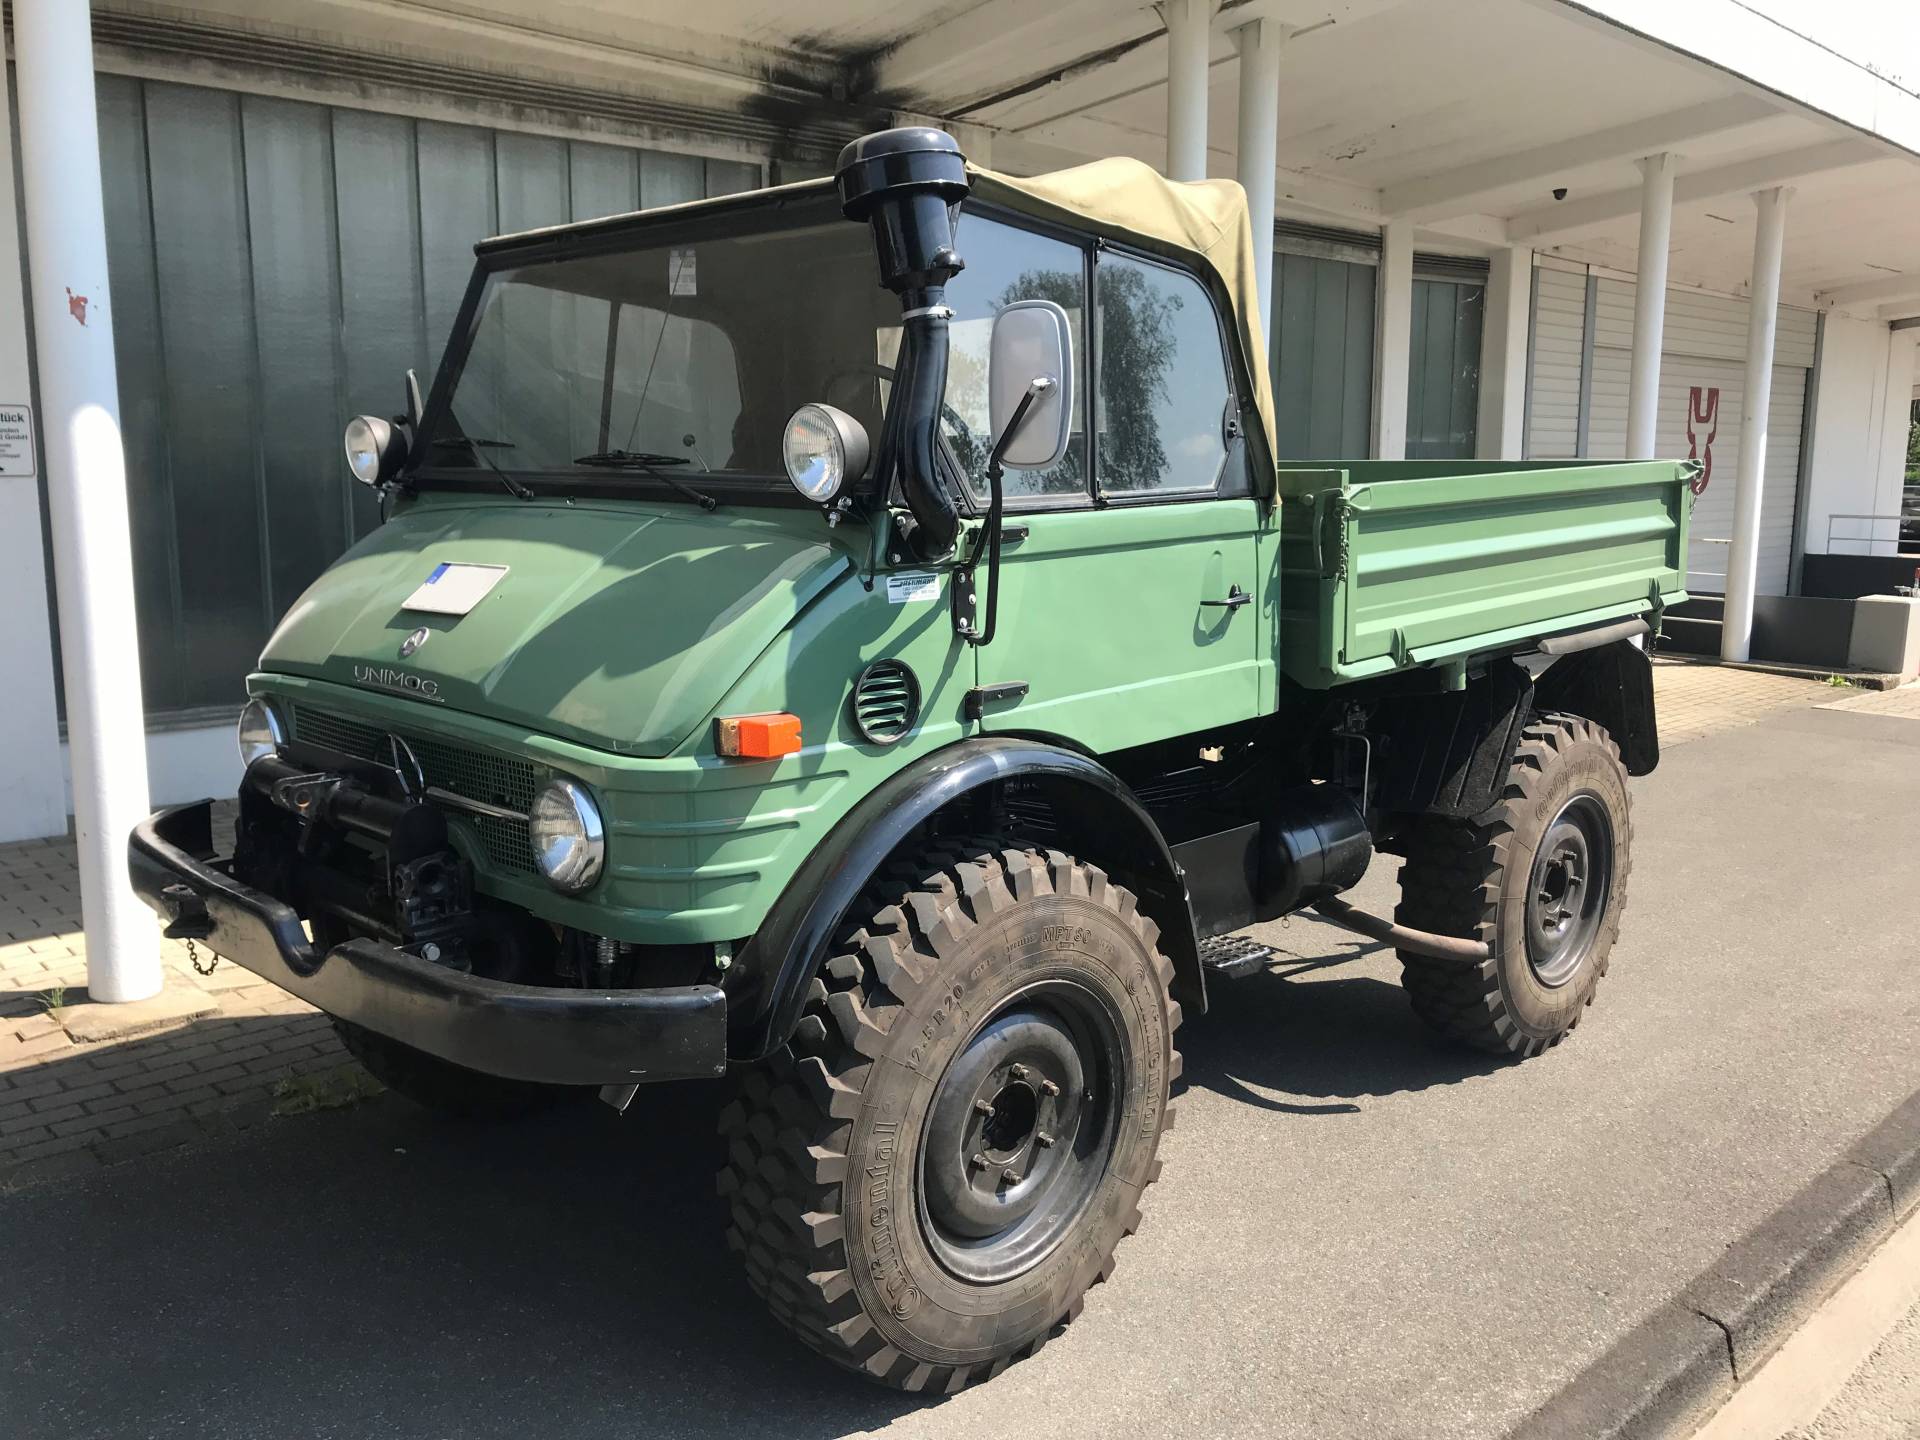 For Sale: Mercedes-Benz Unimog 406 (1974) offered for GBP 56,751